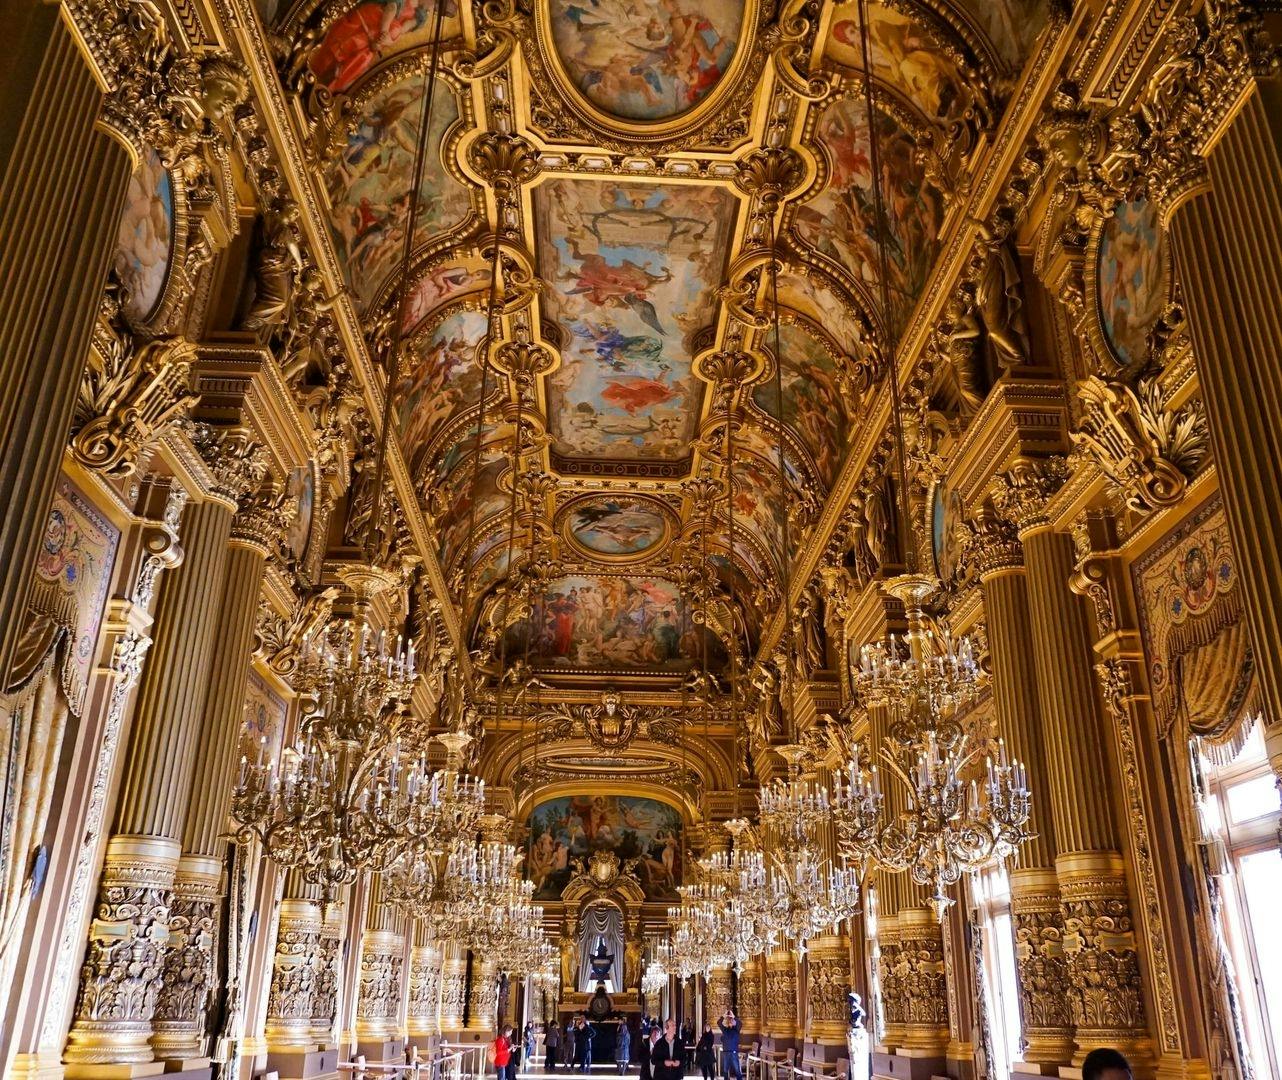 Palace of Versailles tickets with audio tour on mobile app